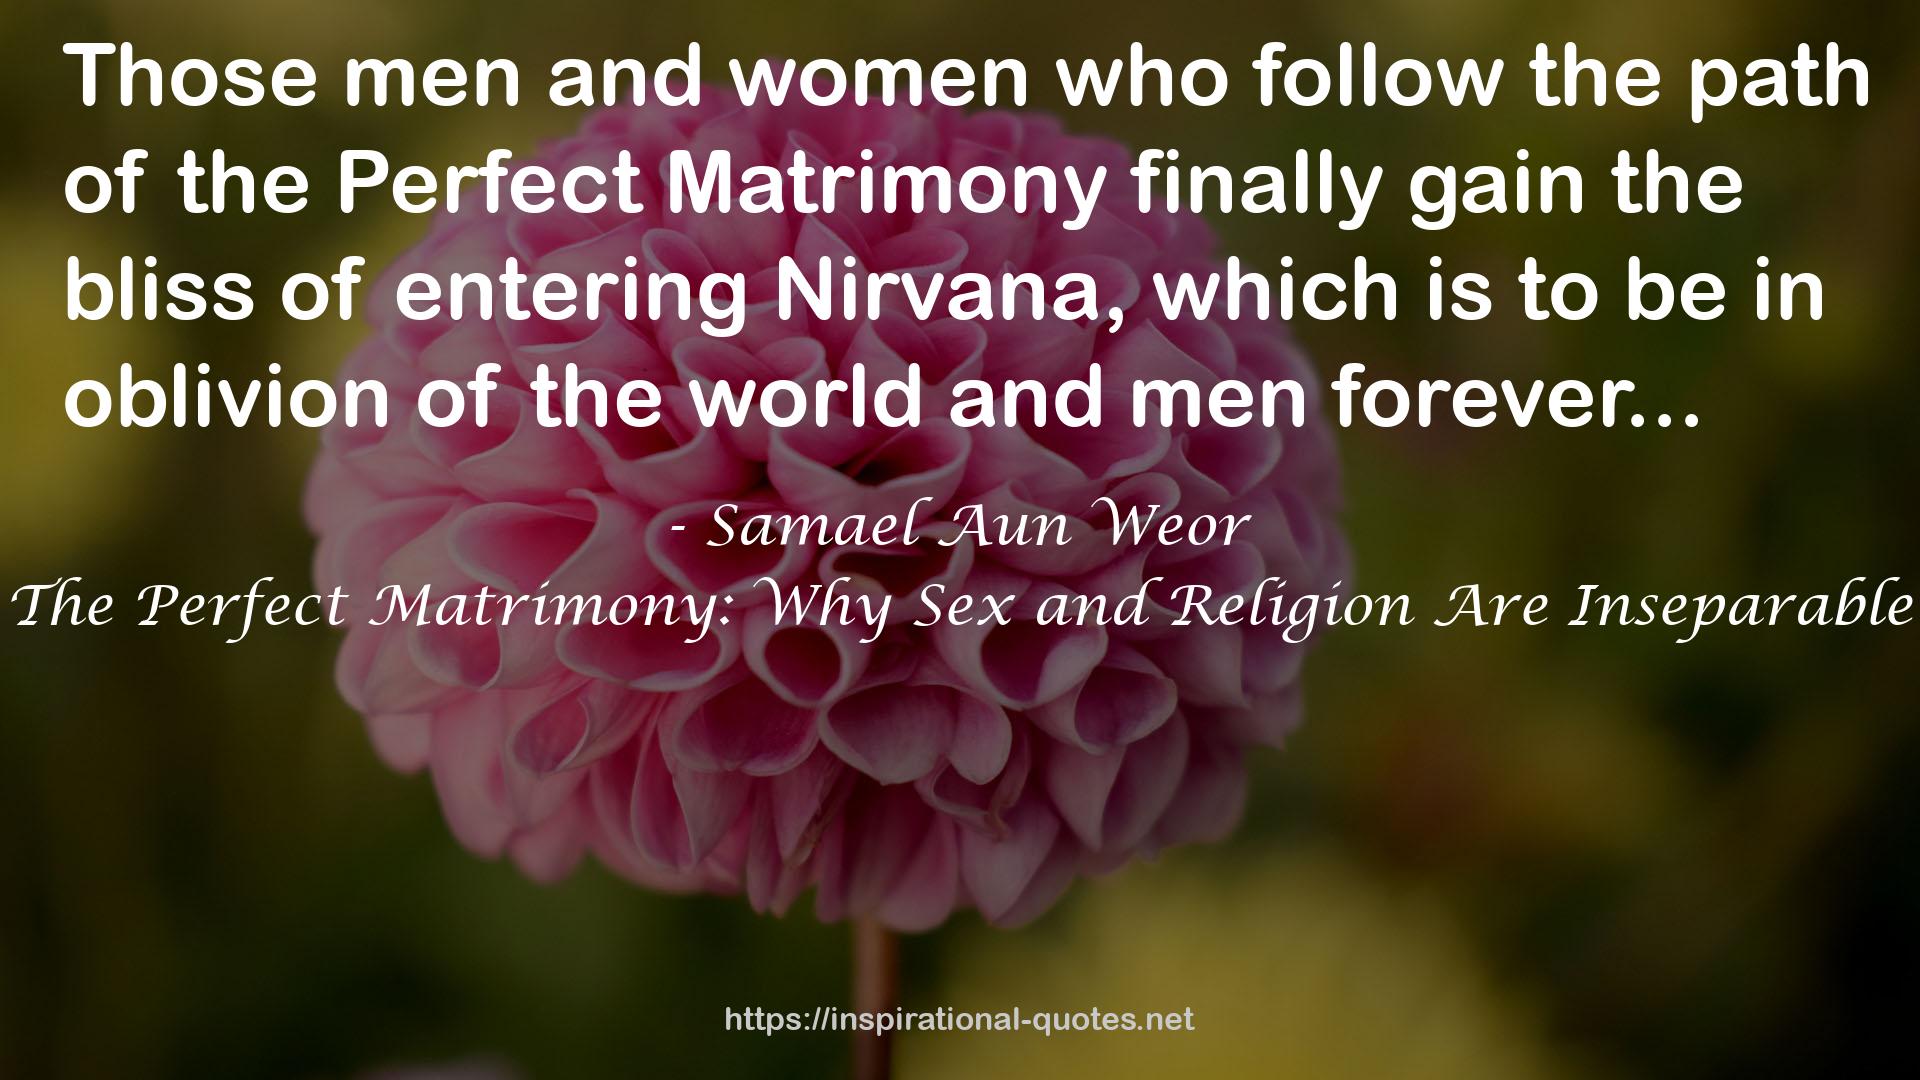 The Perfect Matrimony: Why Sex and Religion Are Inseparable QUOTES